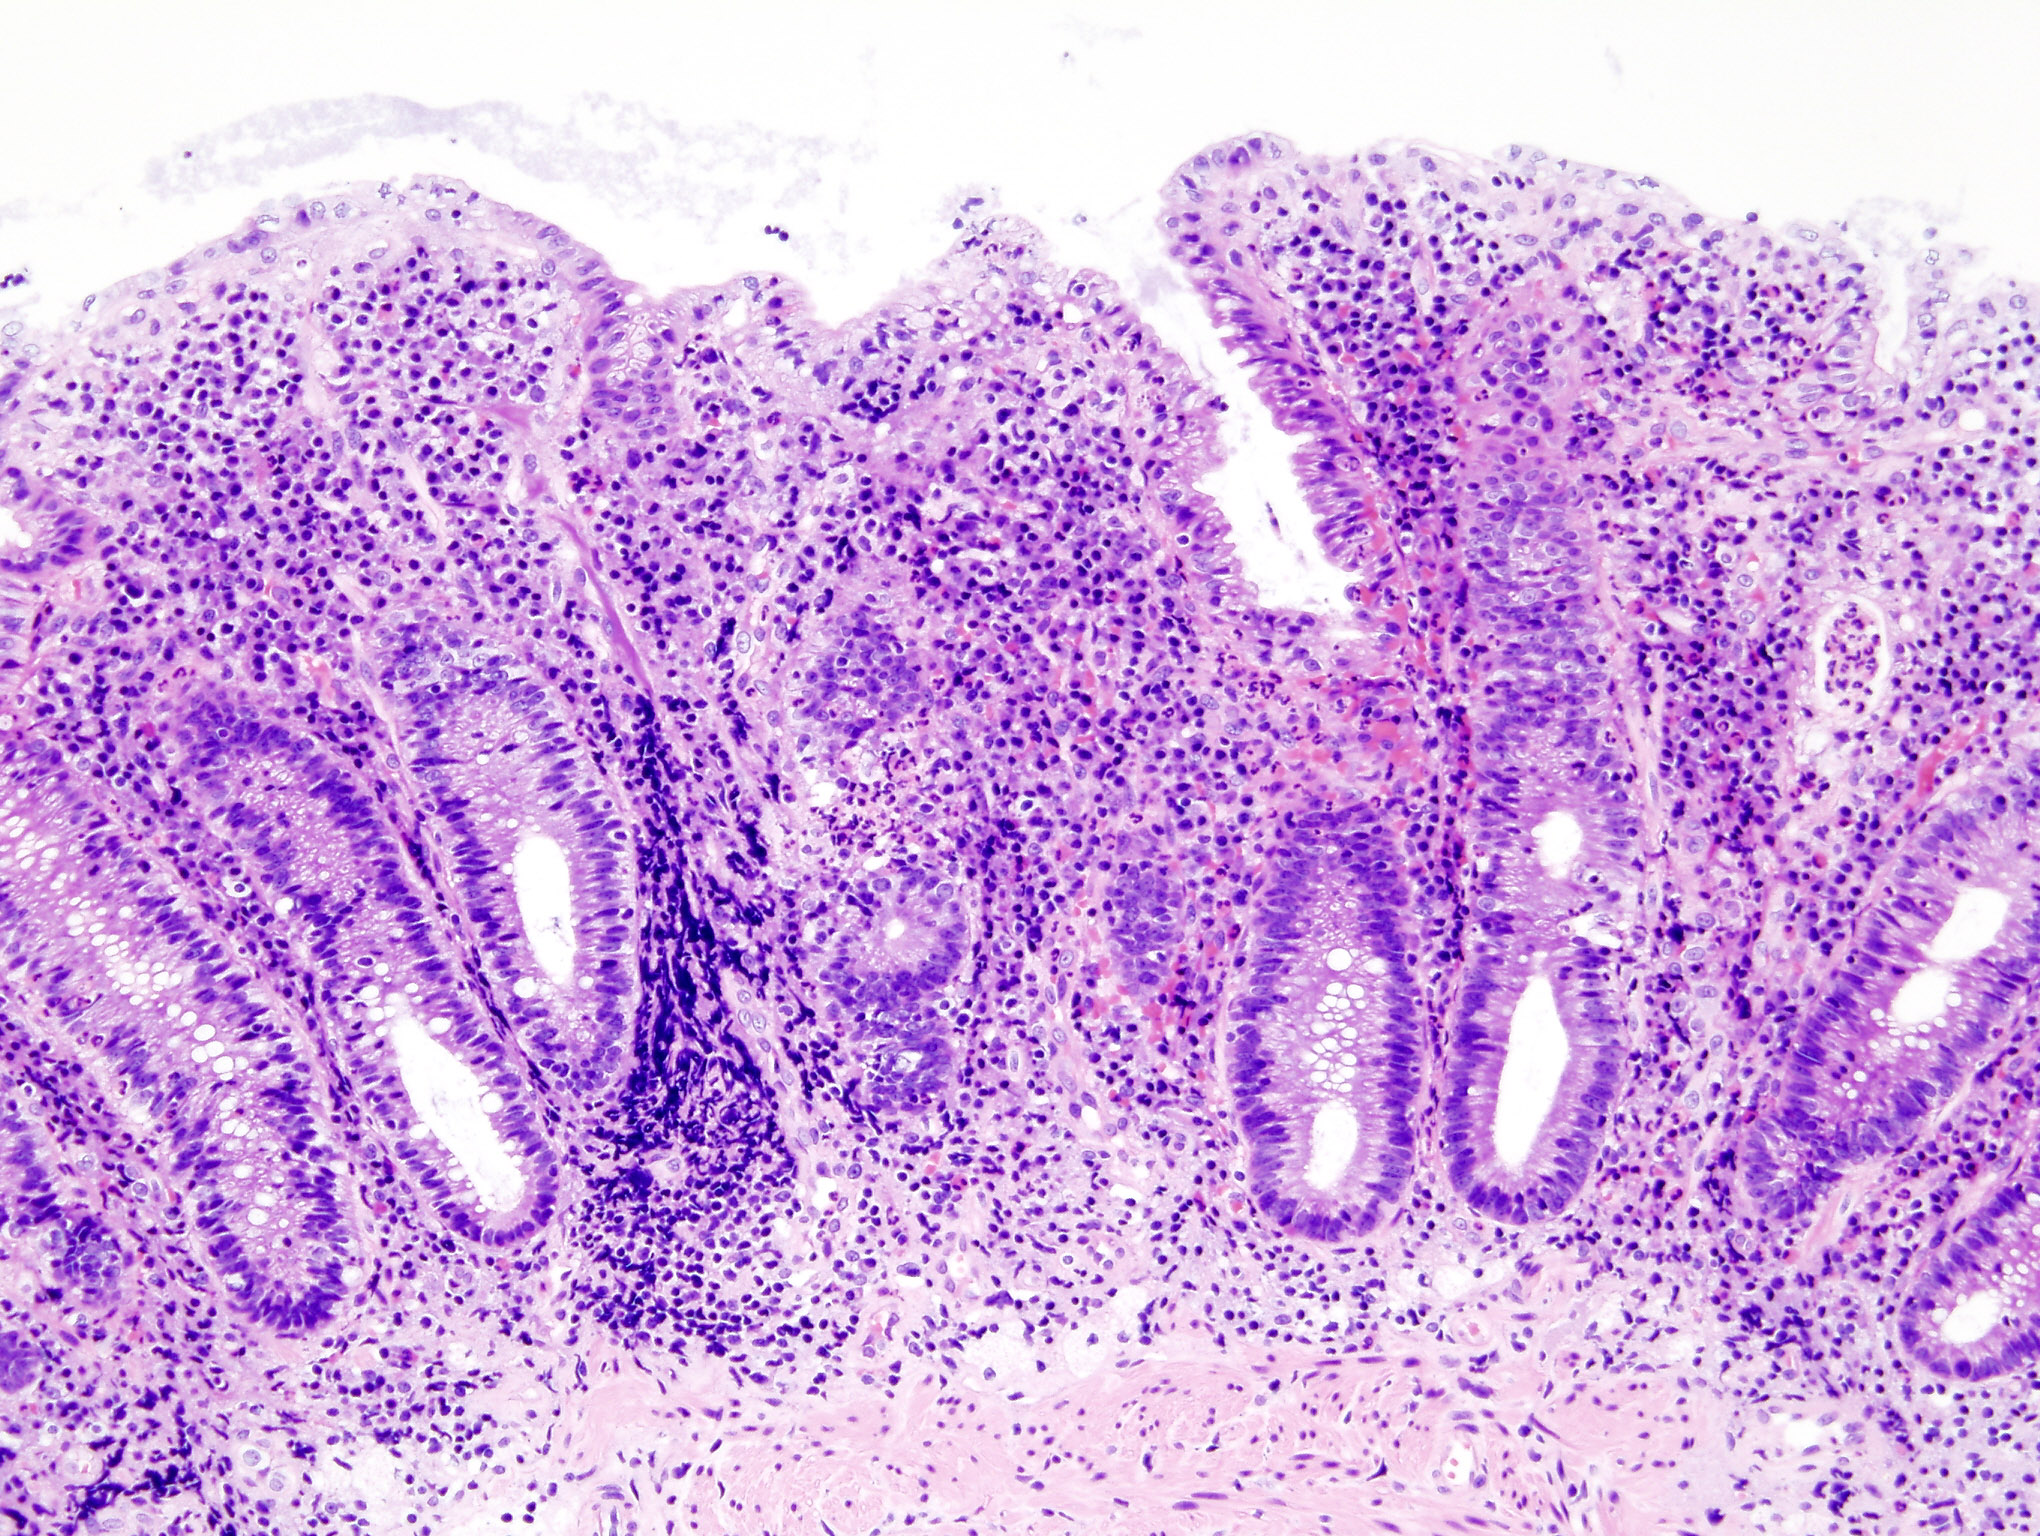 Ulcerative colitis. Biopsy sample (H&E stain) that demonstrates marked lymphocytic infiltration (blue/purple) of the intestinal mucosa and architectural distortion of the crypts. [45]